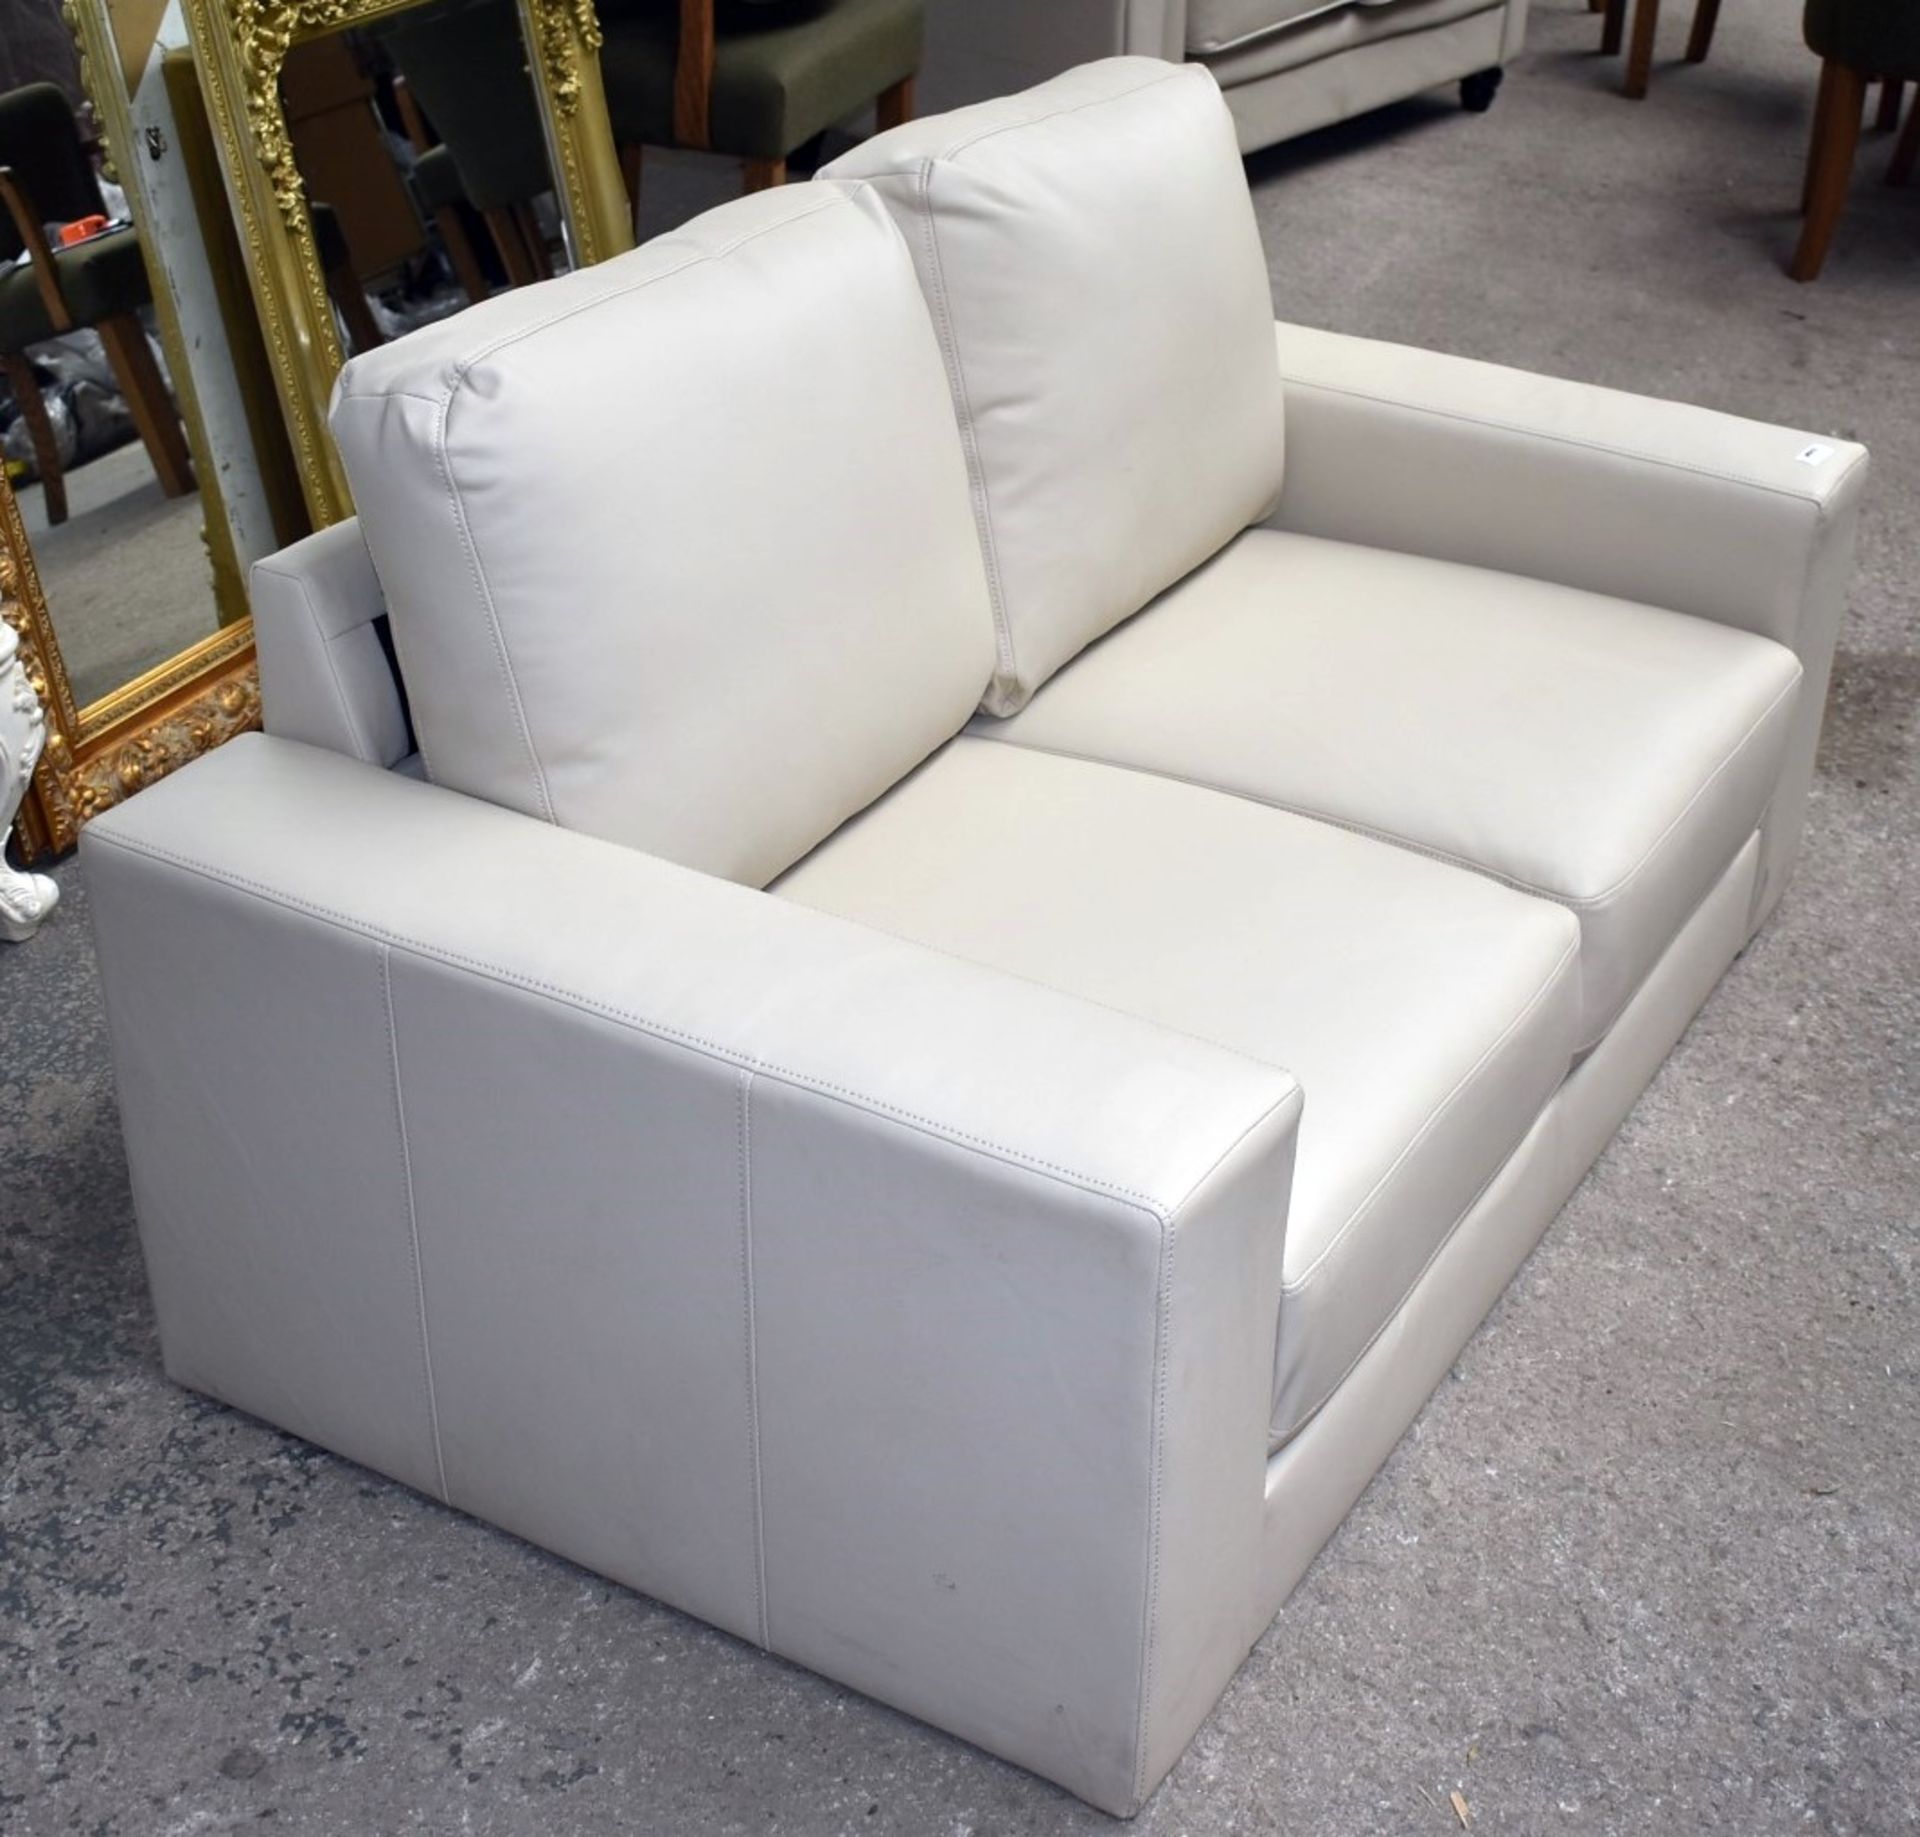 1 x Contemporary Two Seater Sofa in Faux Cream Leather - Ex Display - Dimensions: 146cm Width - Ref: - Image 6 of 8